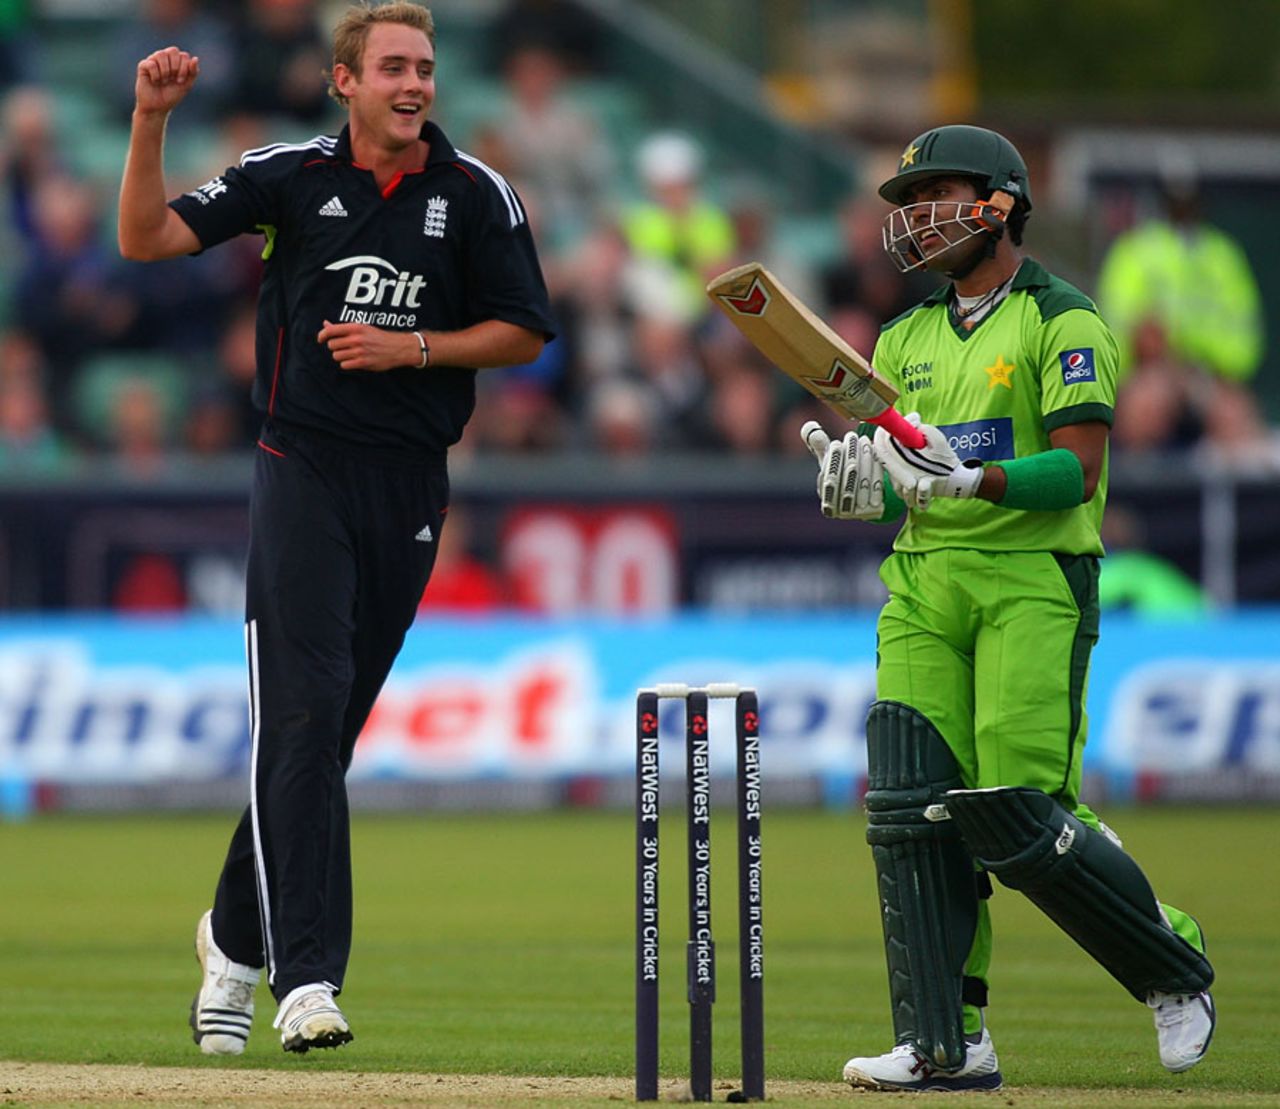 Having looked well set, Umar Akmal gifted his wicket to Stuart Broad, England v Pakistan, 1st ODI, Chester-le-Street, September 10 2010 